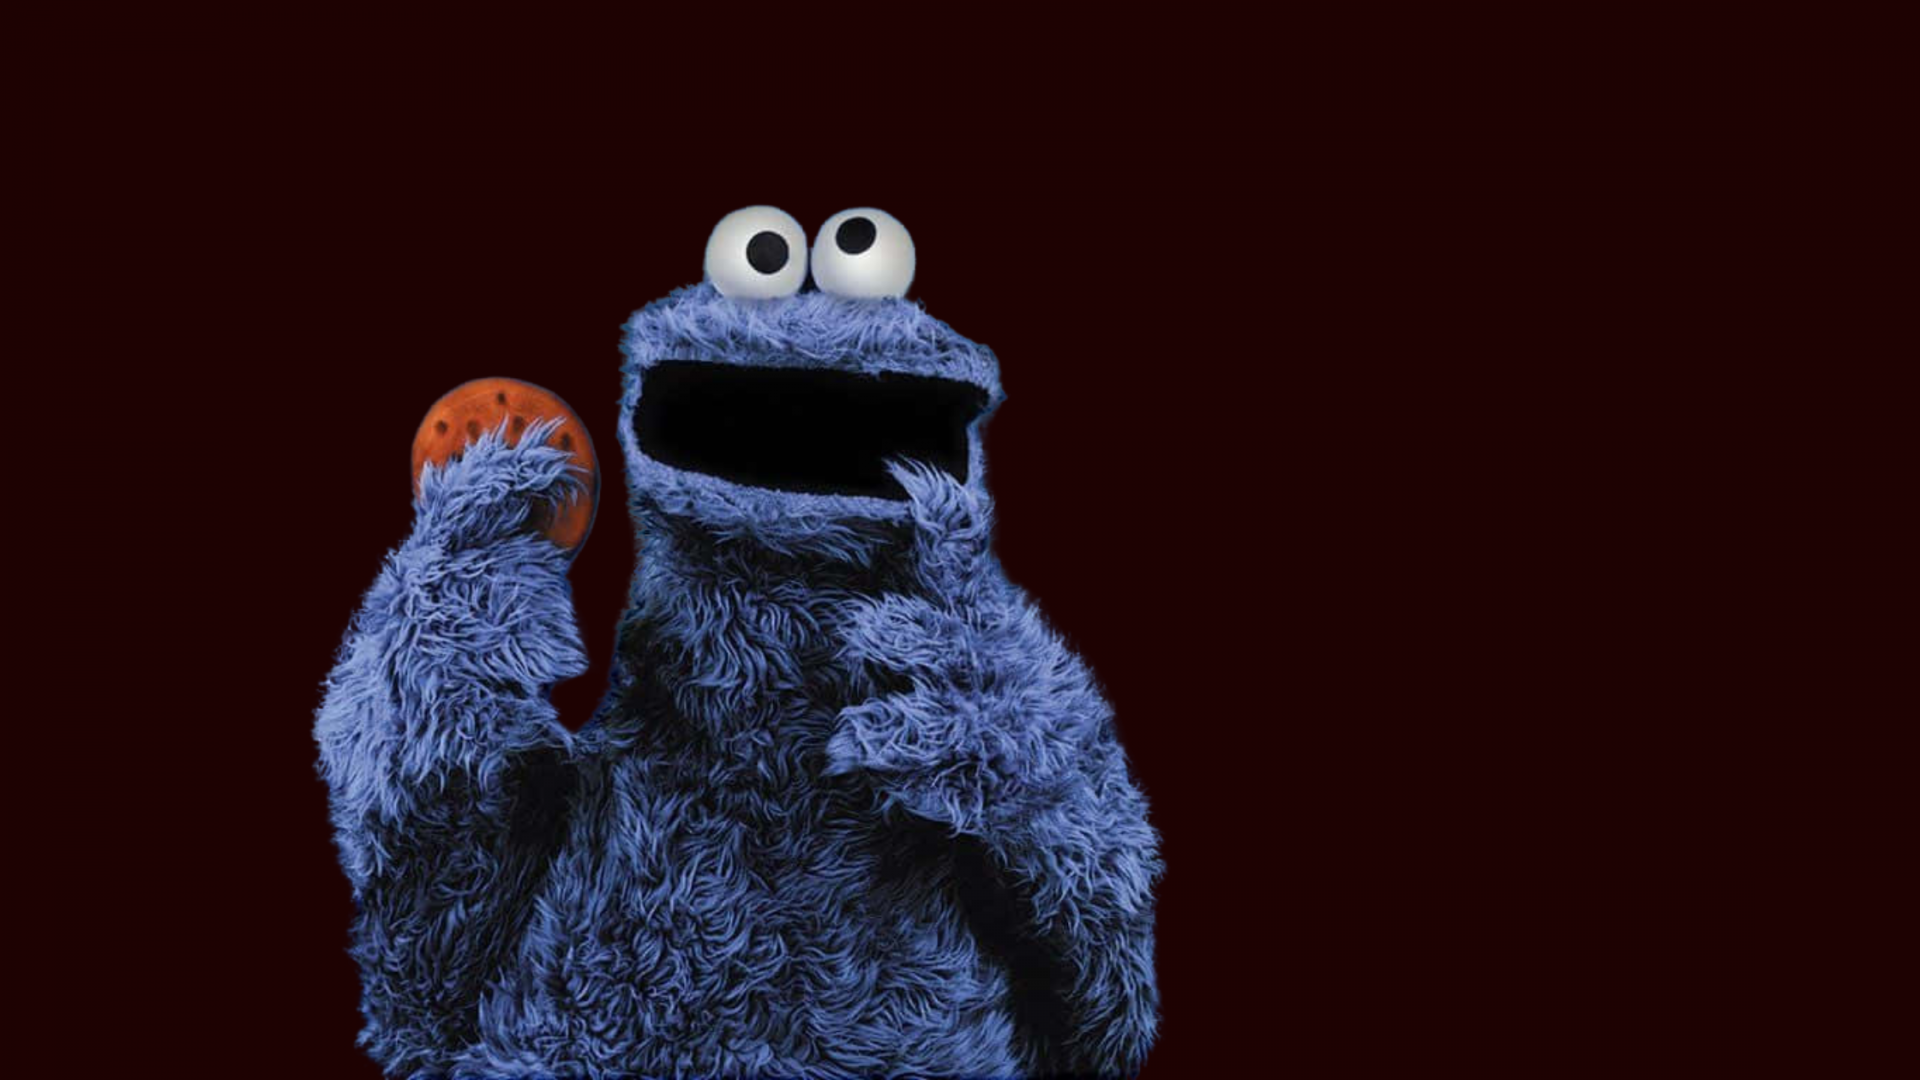 The cookie-monster illustrating the discontinuing of third-party cookies